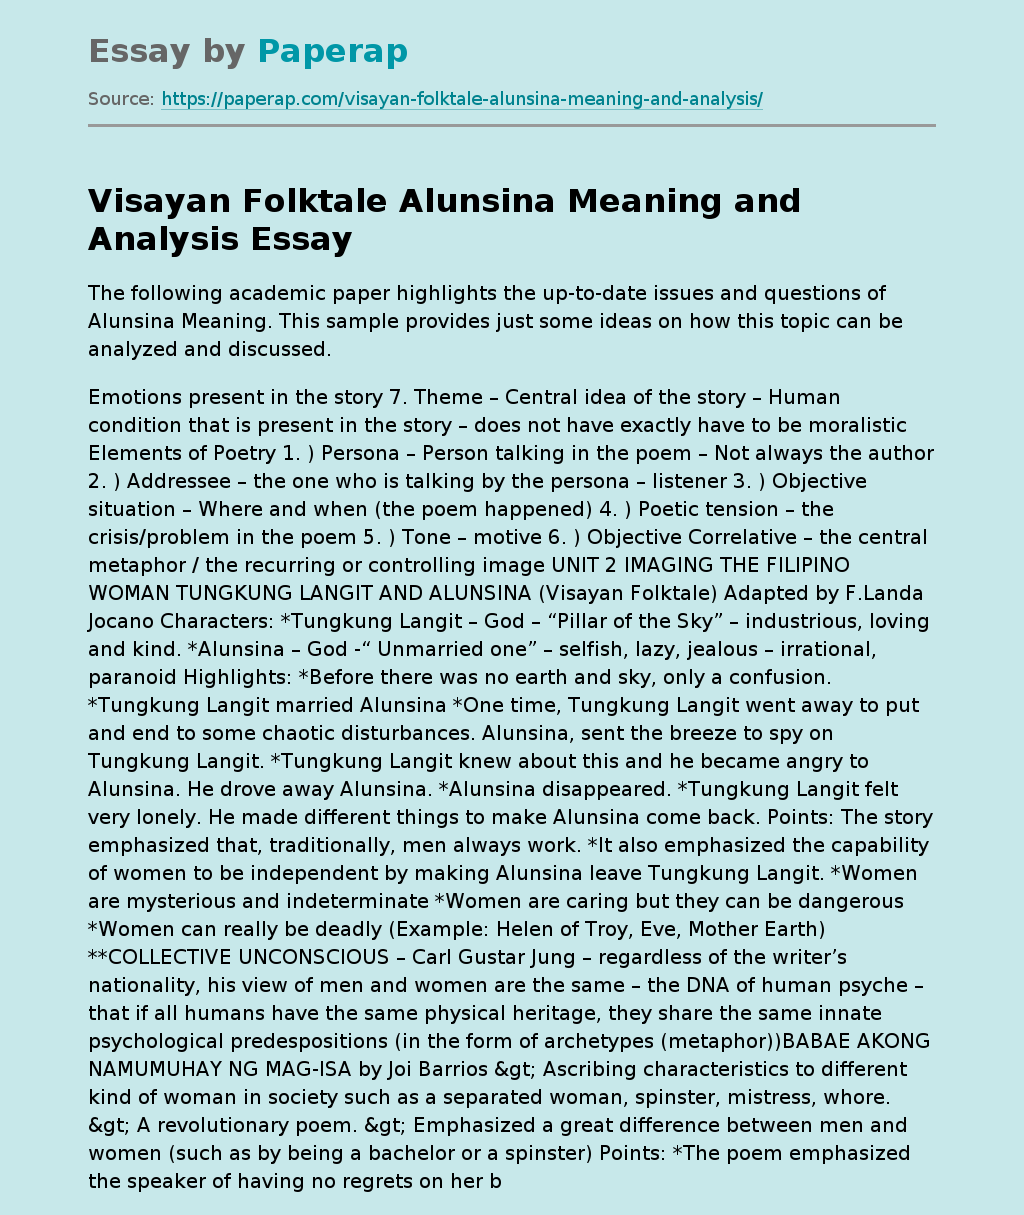 Visayan Folktale Alunsina Meaning and Analysis